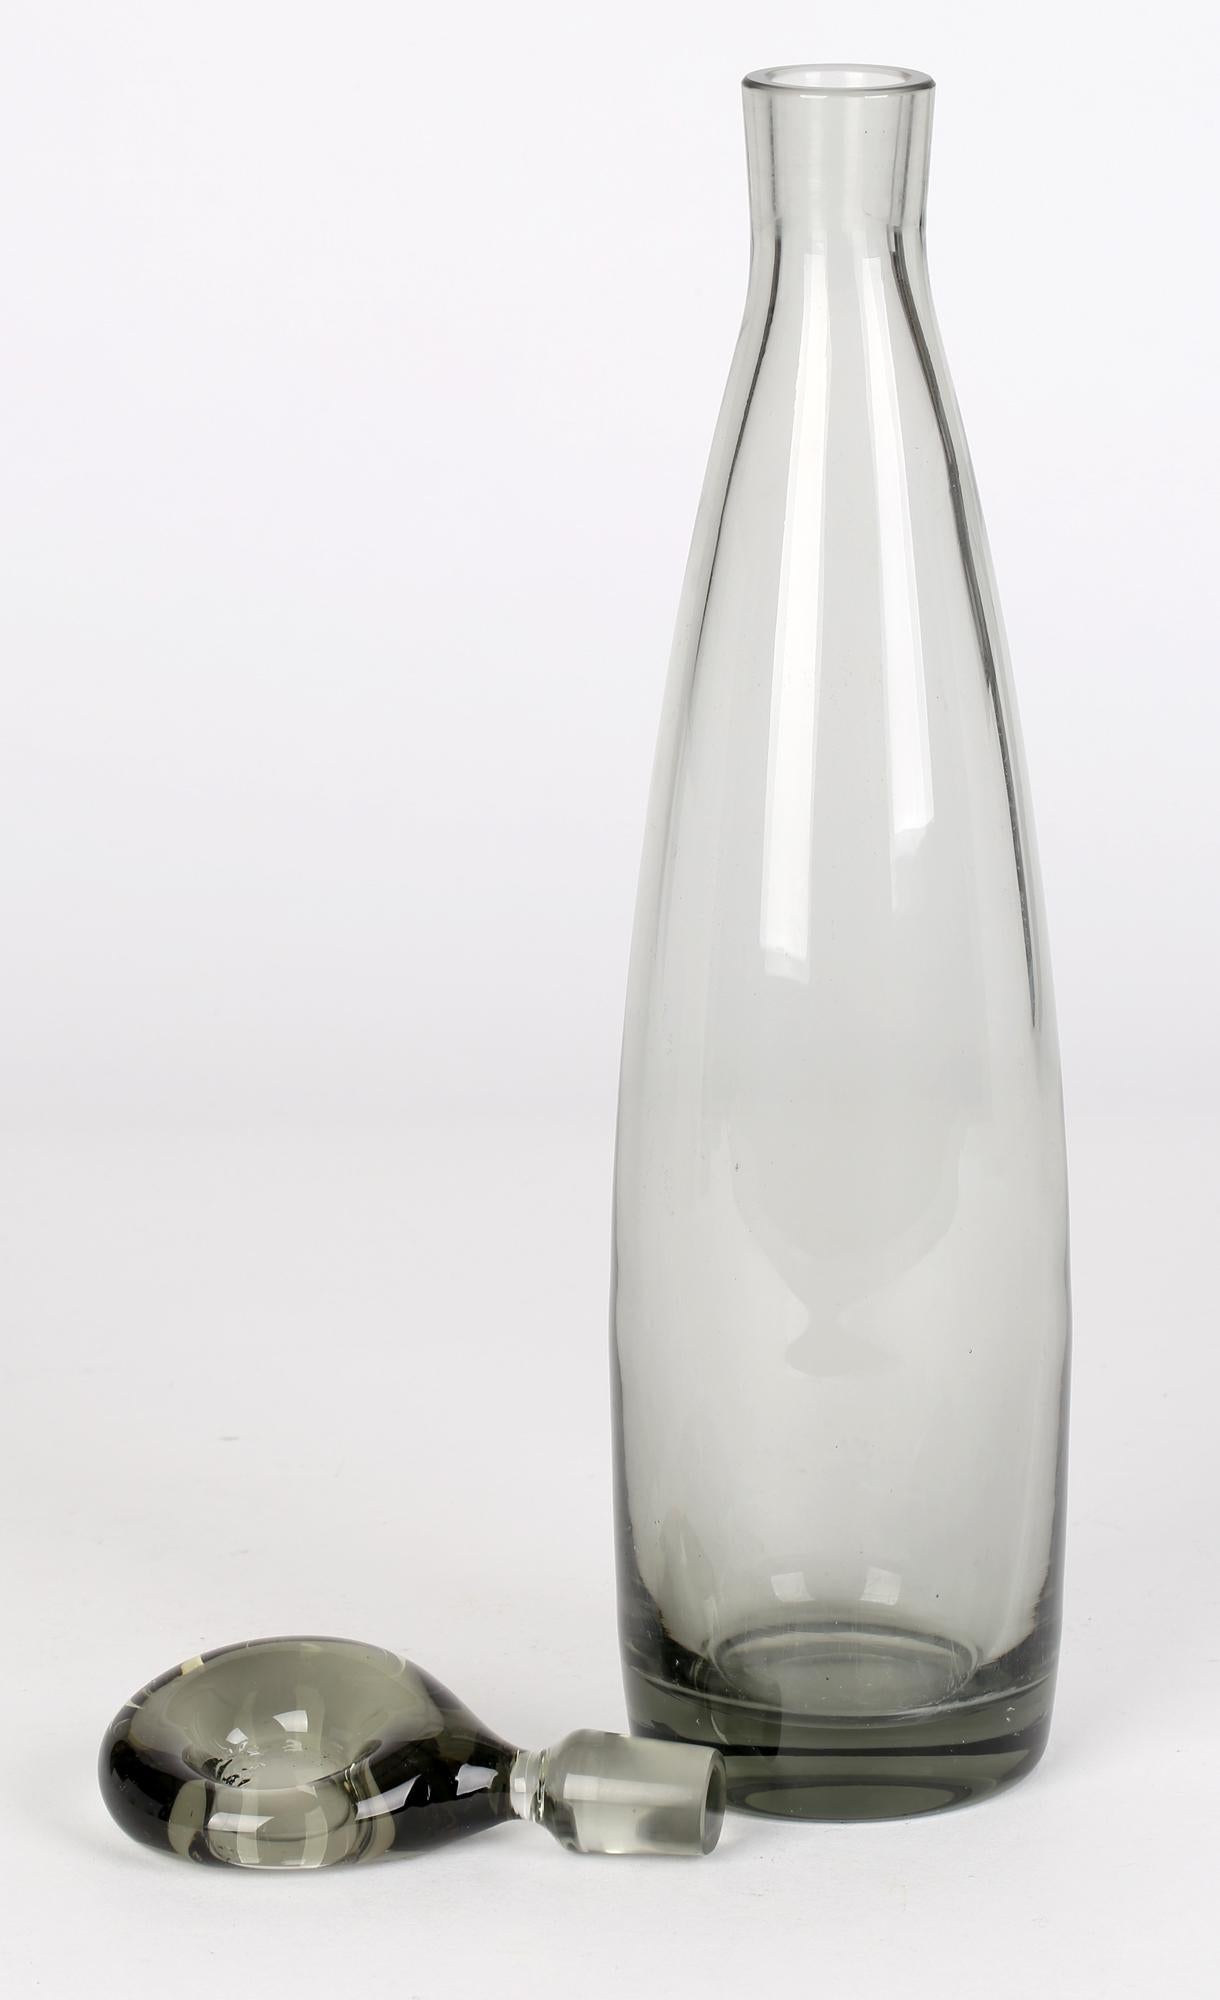 A stylish Mid-Century Danish Holmegaard tinted grey glass Aristokat decanter and stopper designed by Per Lütken (Danish, 1916-1998). This elegant hand-blown glass decanter stands on a wide rounded foot with a recessed polished pontil and is of